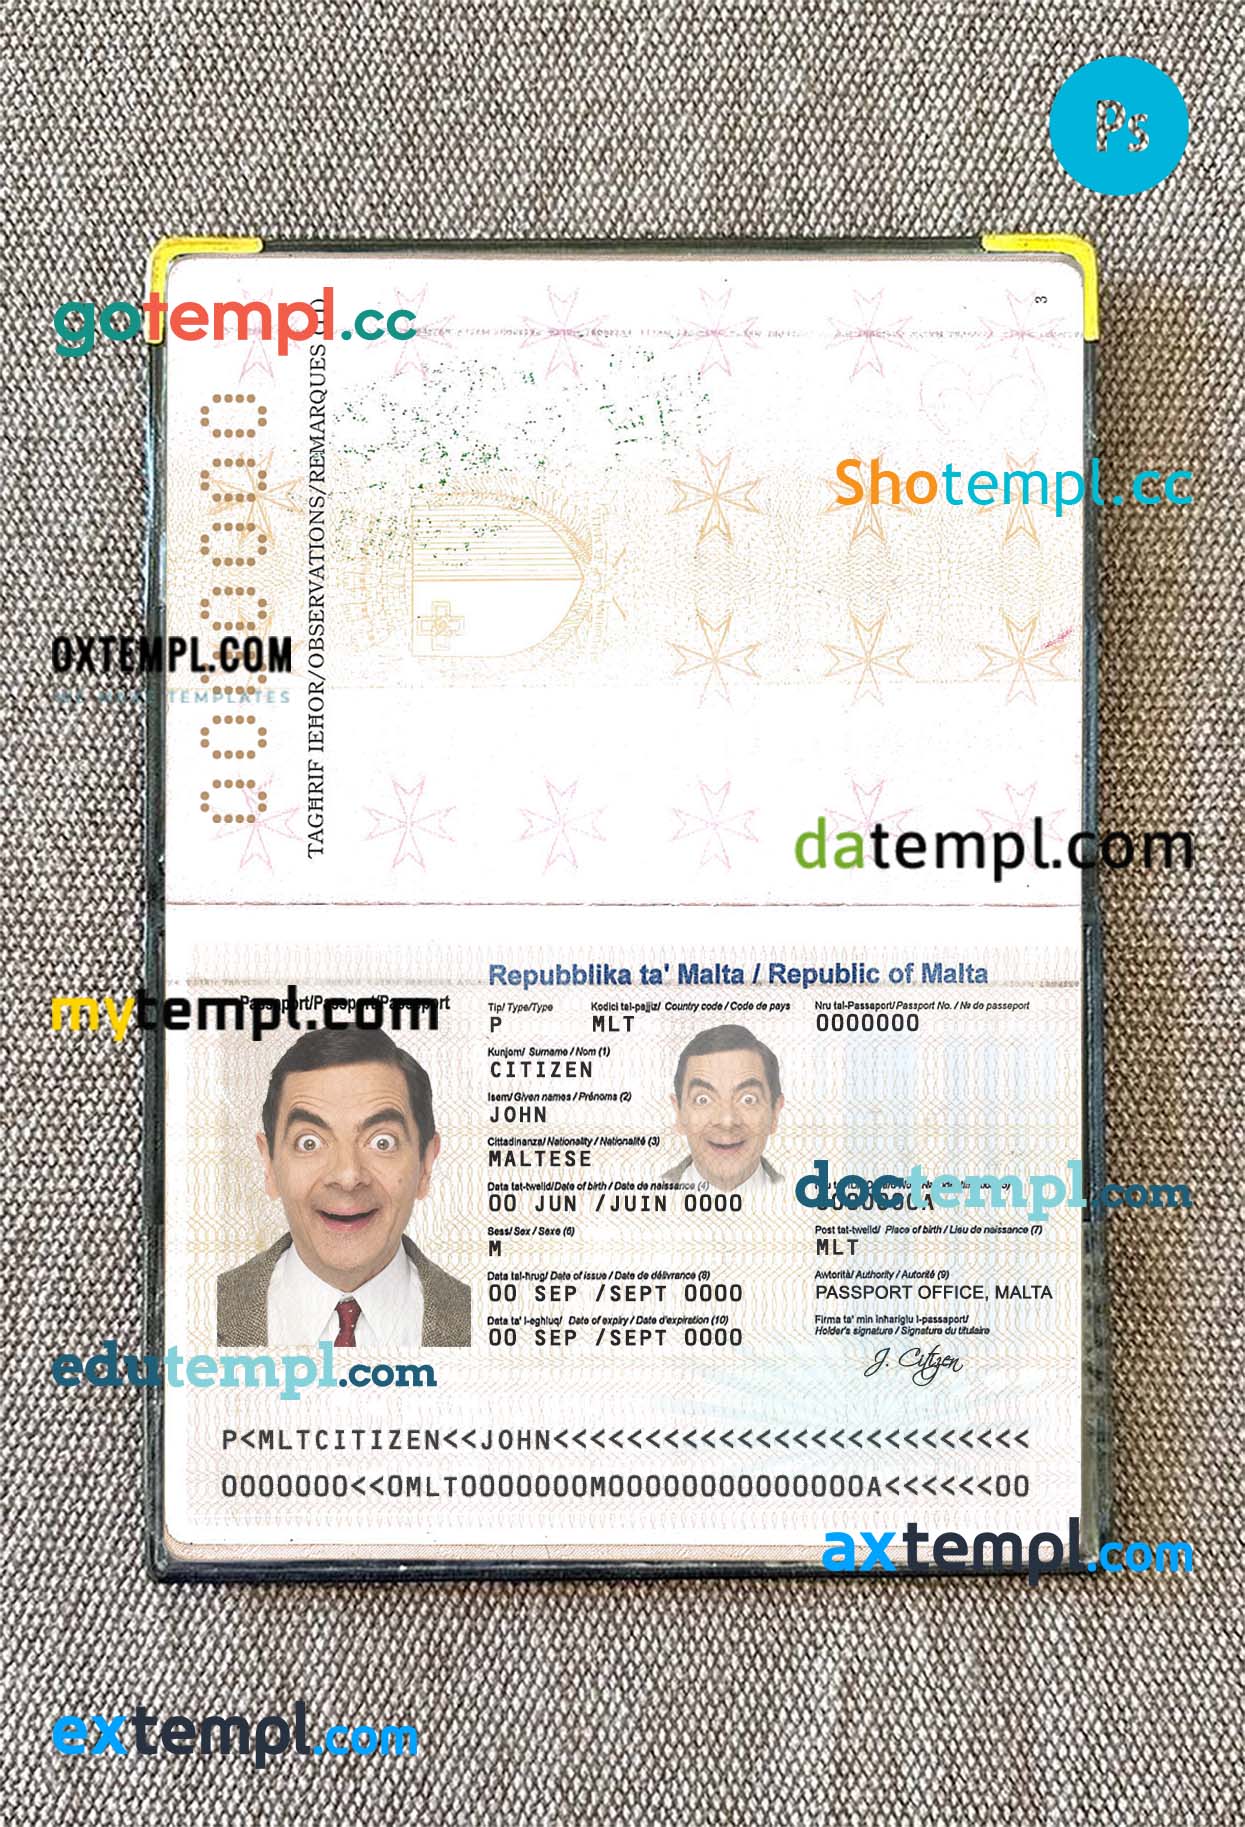 USA passport ID card PSD files, scan look and photographed image, 2 in 1